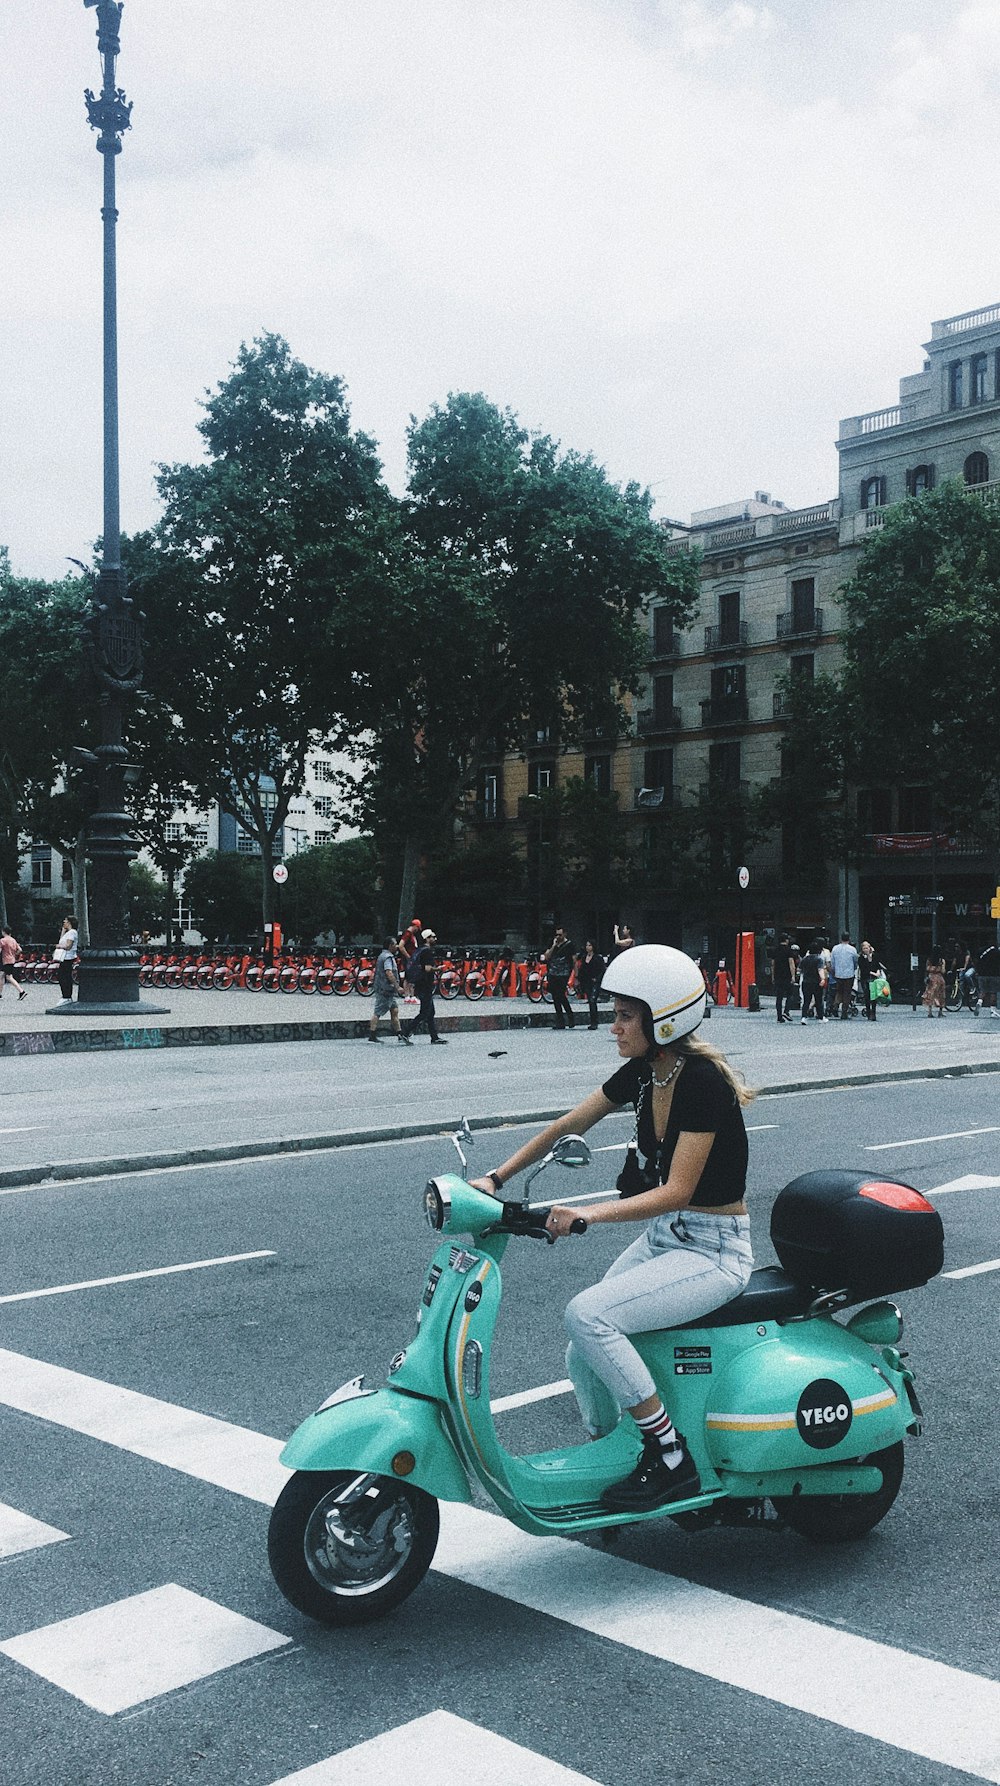 woman riding green motor scooter near road viewing people and buildings under white skies